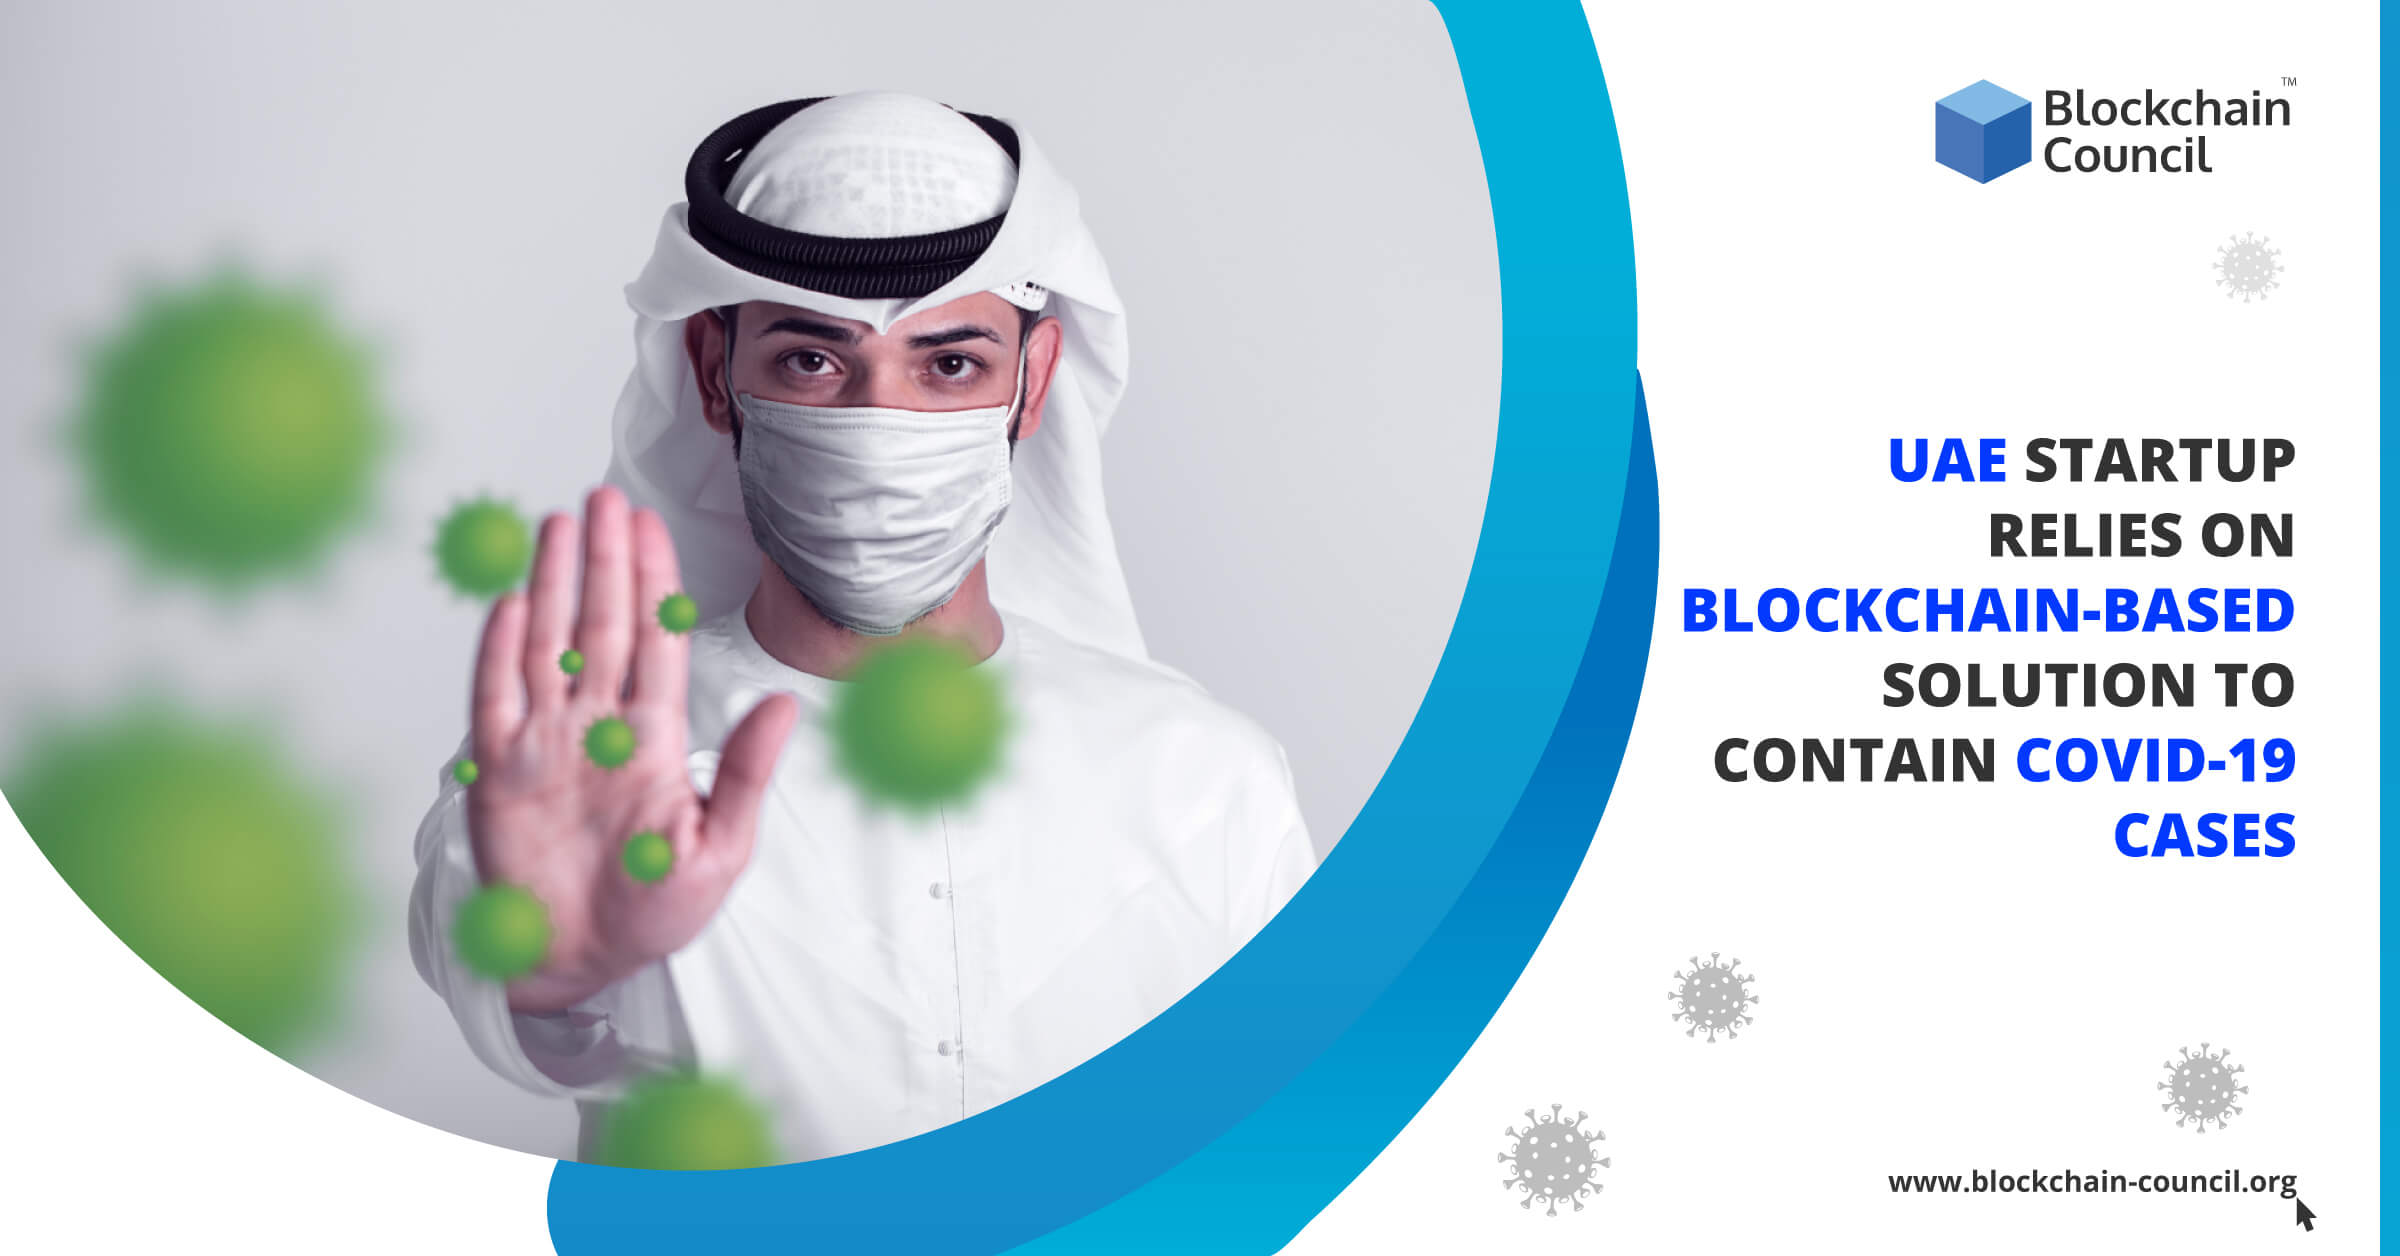 UAE Startup Relies on Blockchain-Based Solution to Contain COVID-19 Cases 